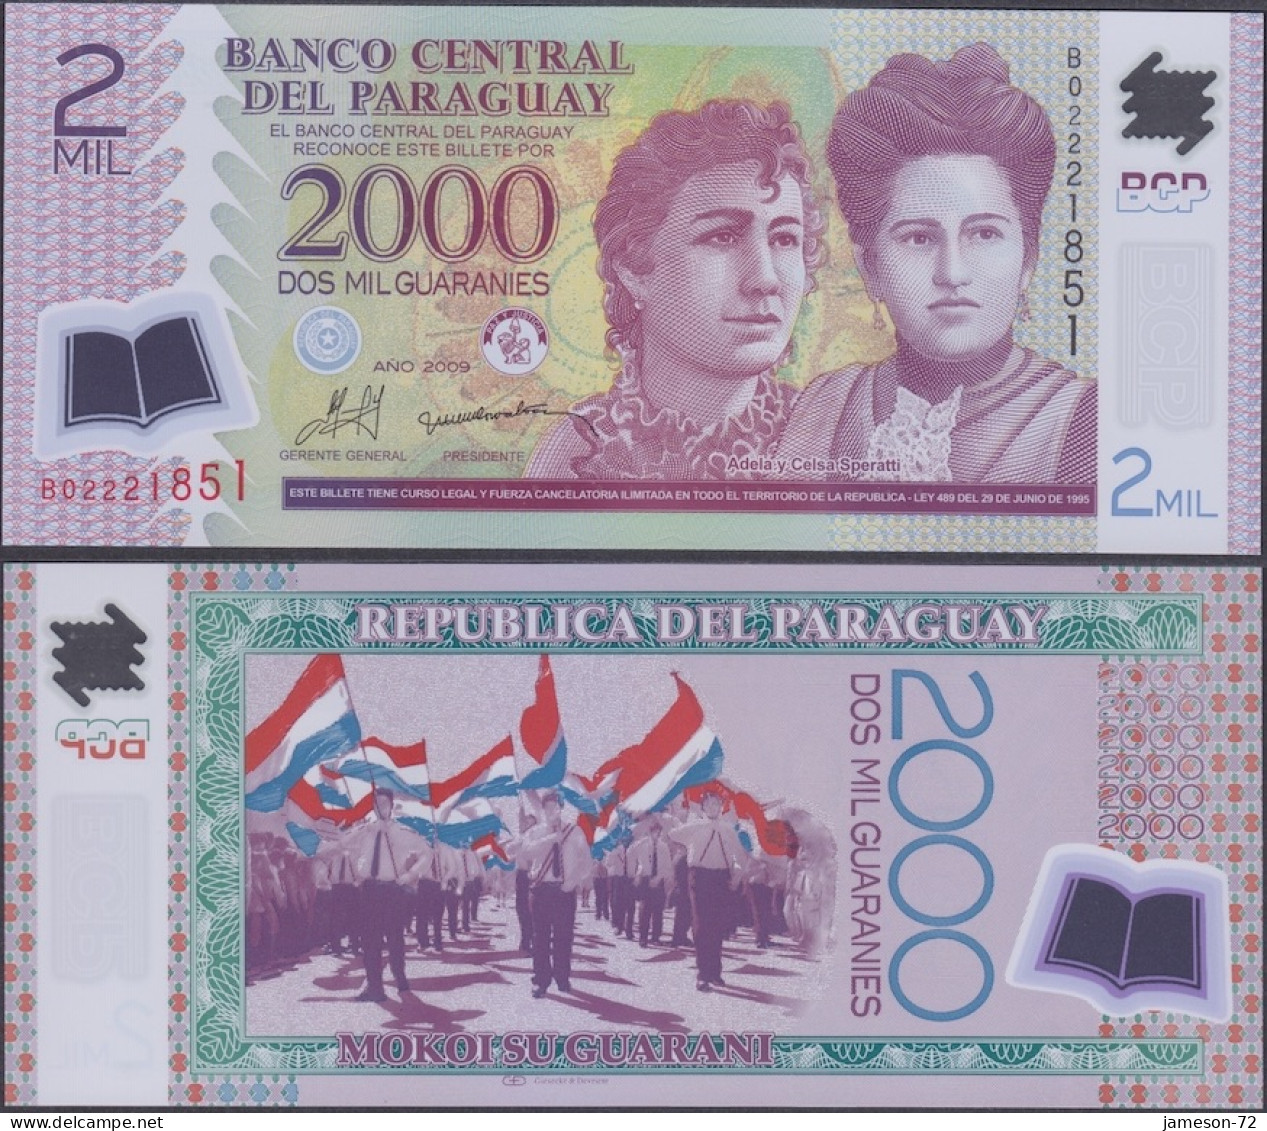 PARAGUAY - 2000 Guaranies 2009 P# 228b America Banknote - Edelweiss Coins - Paraguay